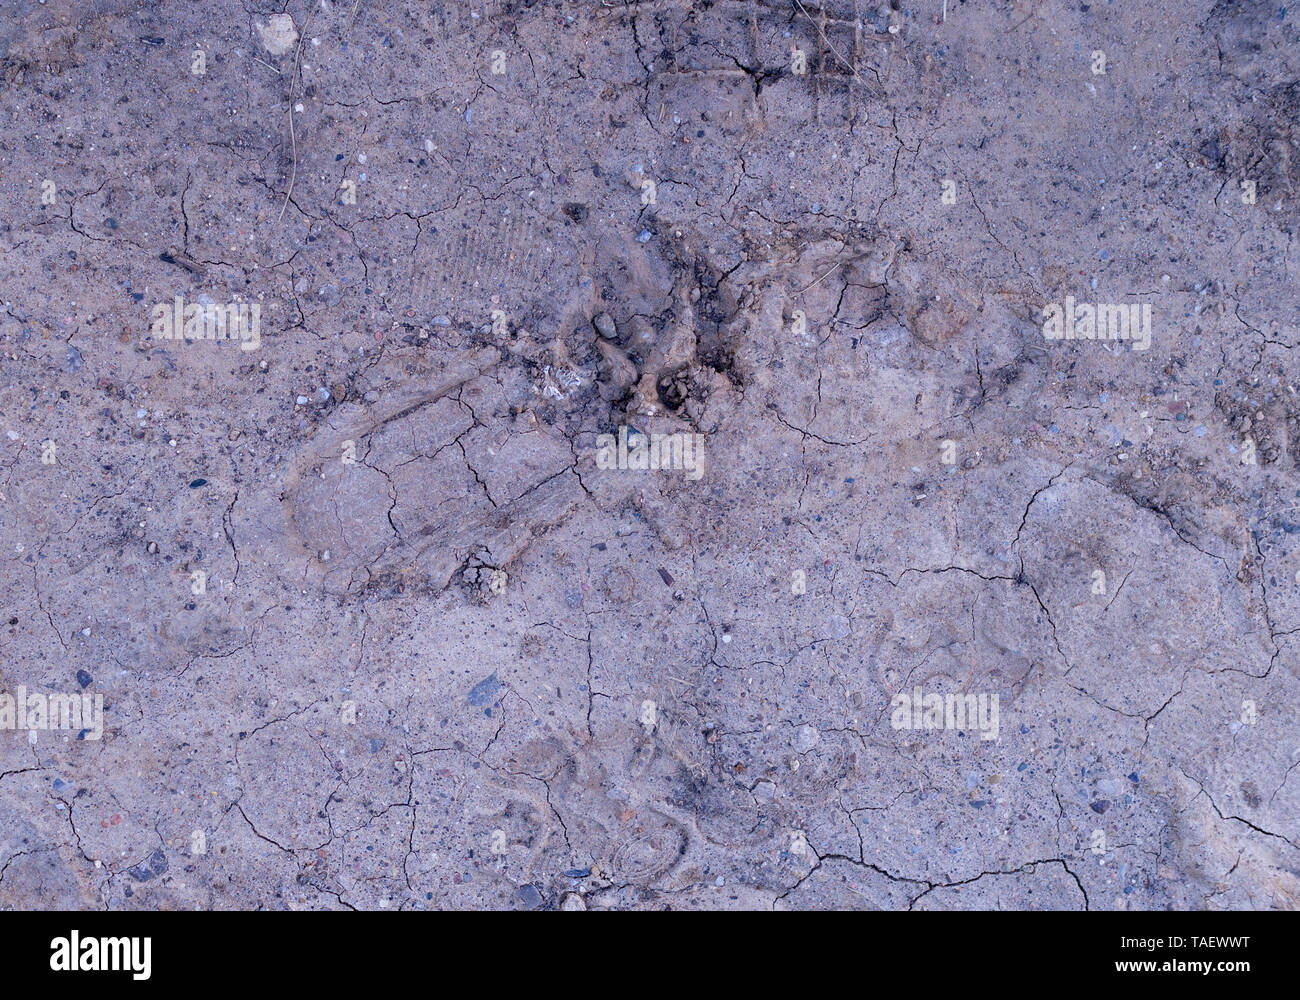 dog paw prints in the soft dirt. background, natural. Stock Photo